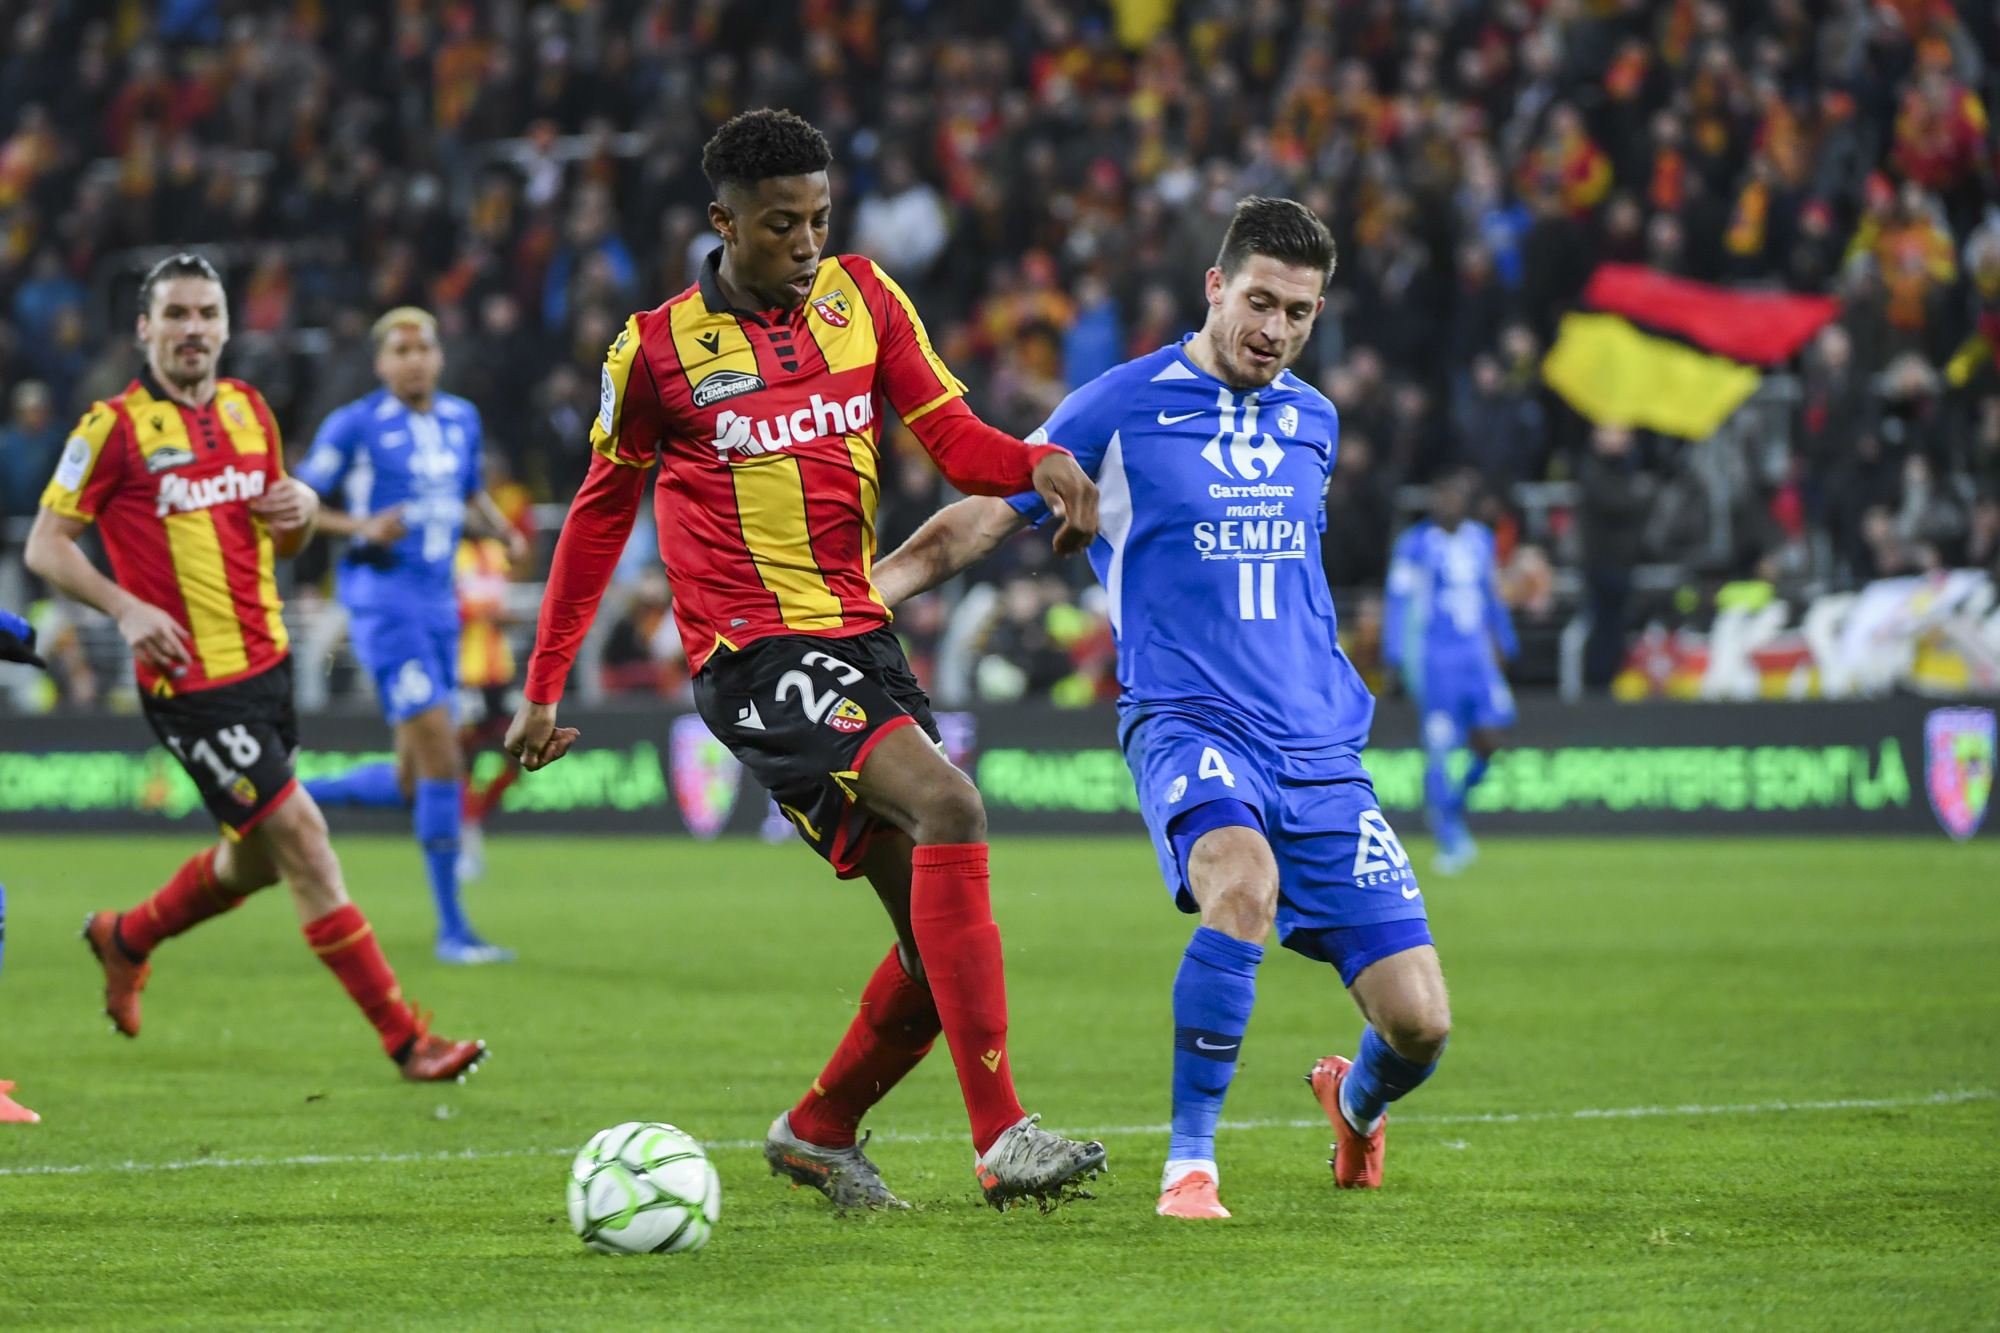 Simon Bokote BANZA of Lens and Eric VANDENABEELE of Grenoble during the Ligue 2 match between RC Lens and Grenoble at Stade Bollaert-Delelis on February 10, 2020 in Lens, France. (Photo by Aude Alcover/Icon Sport) - Stade Bollaert-Delelis - Lens (France)